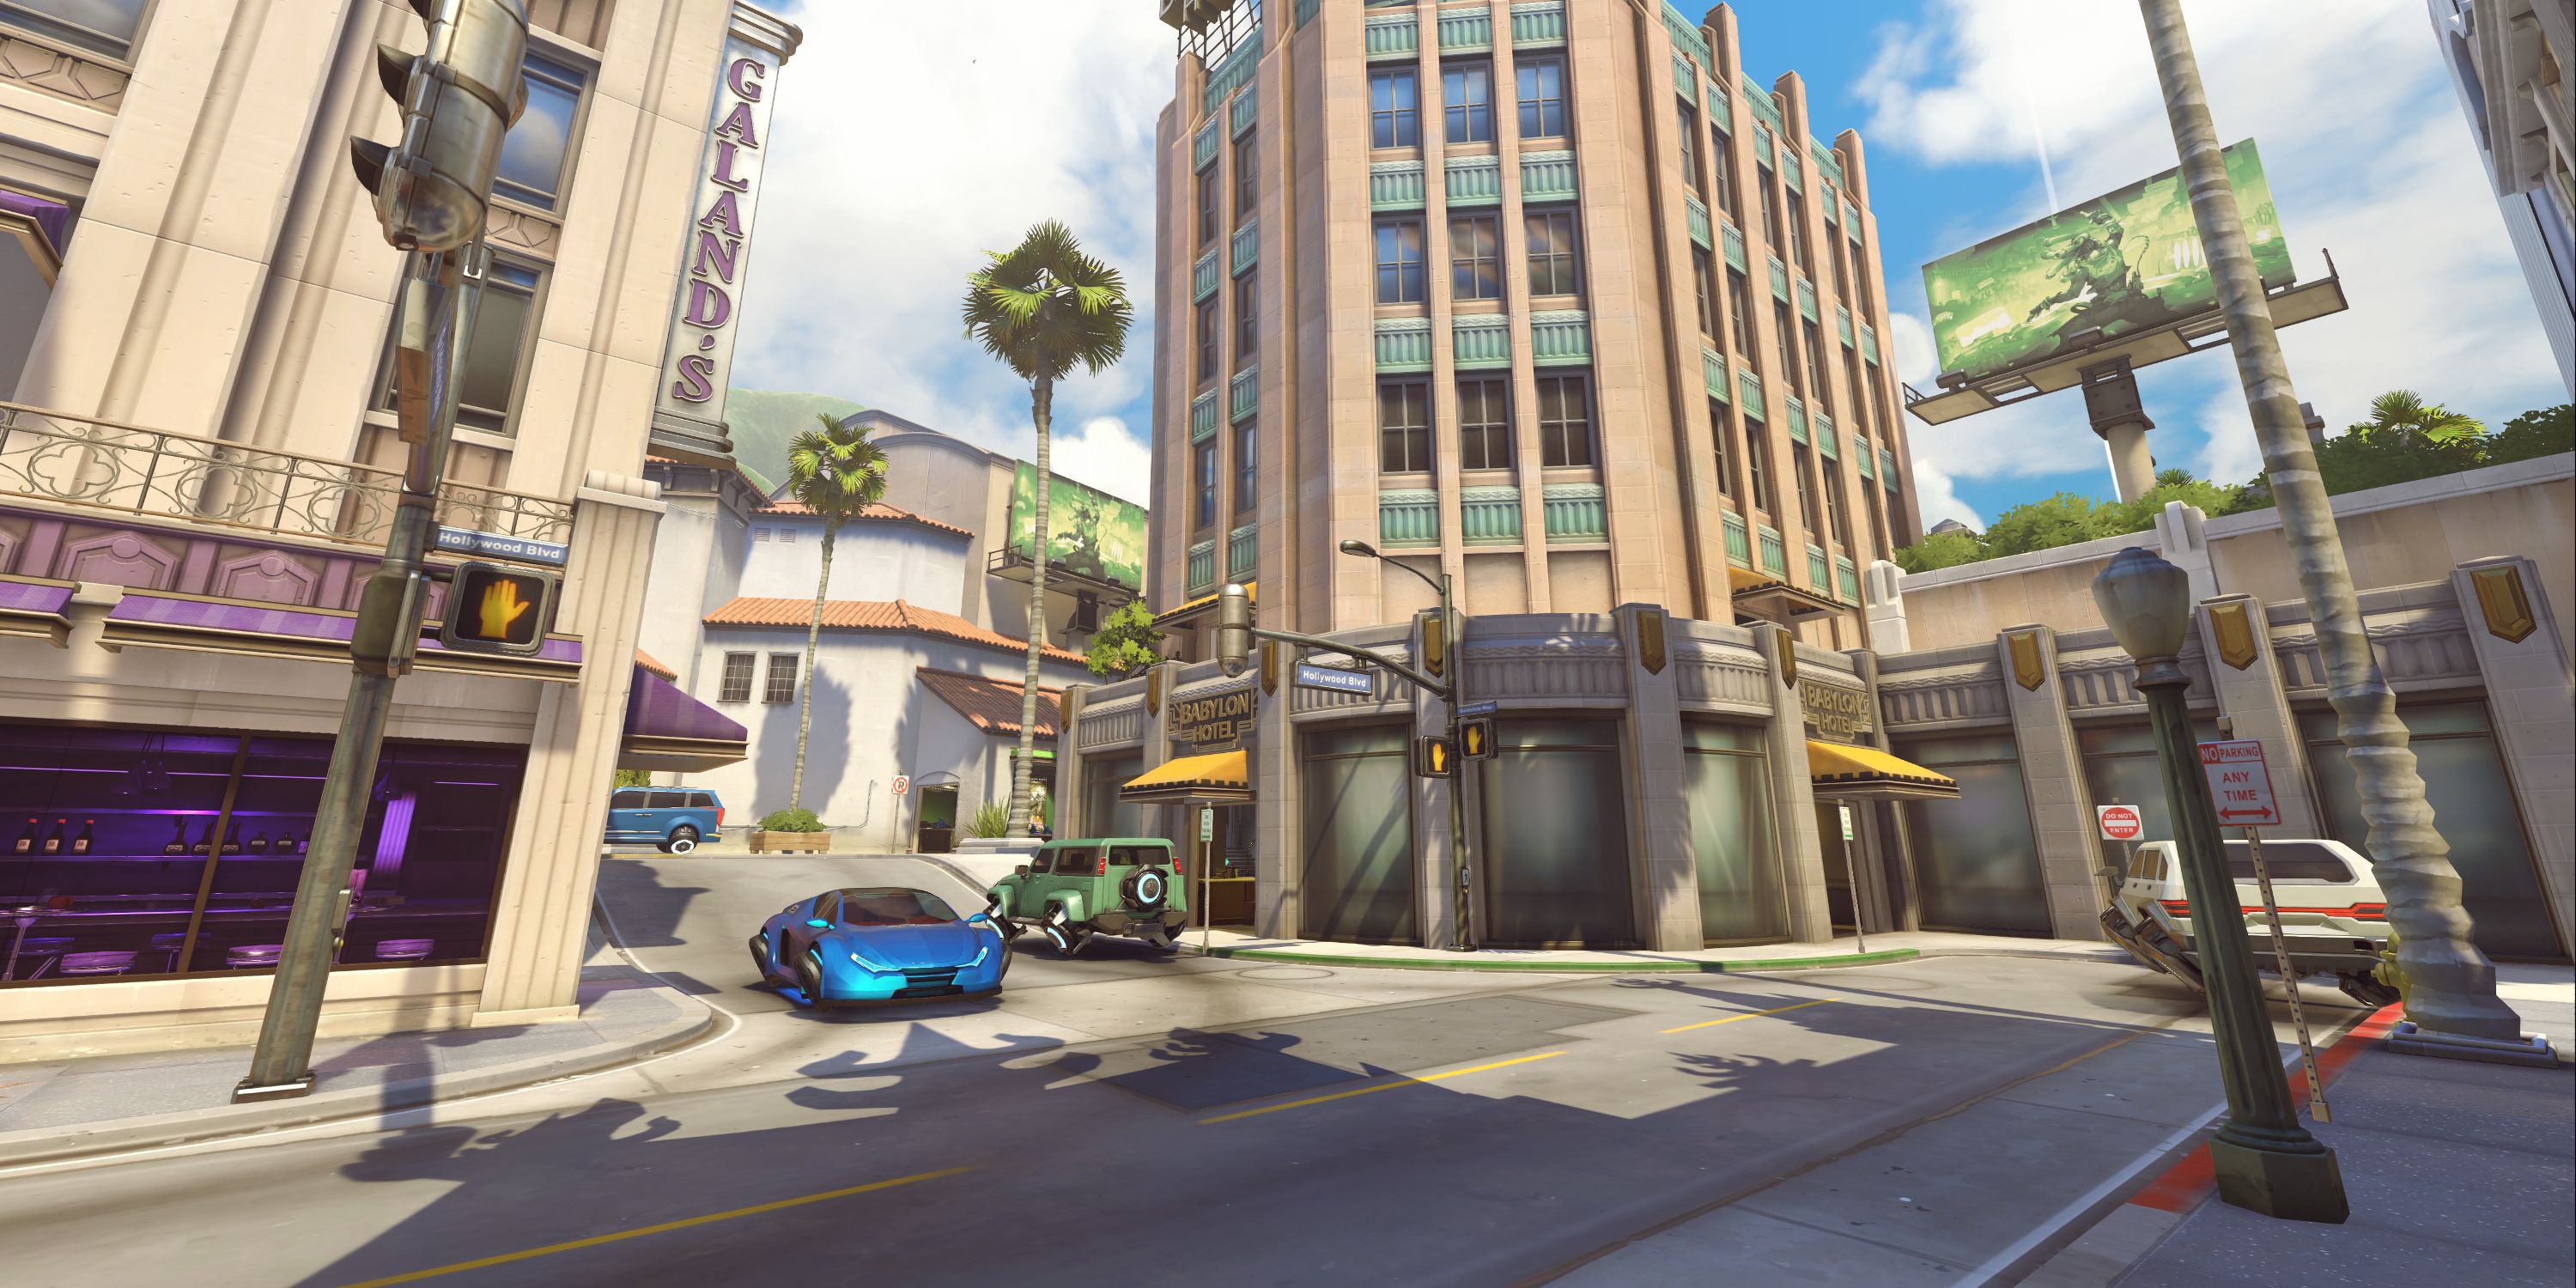 The streets of Hollywood in Overwatch